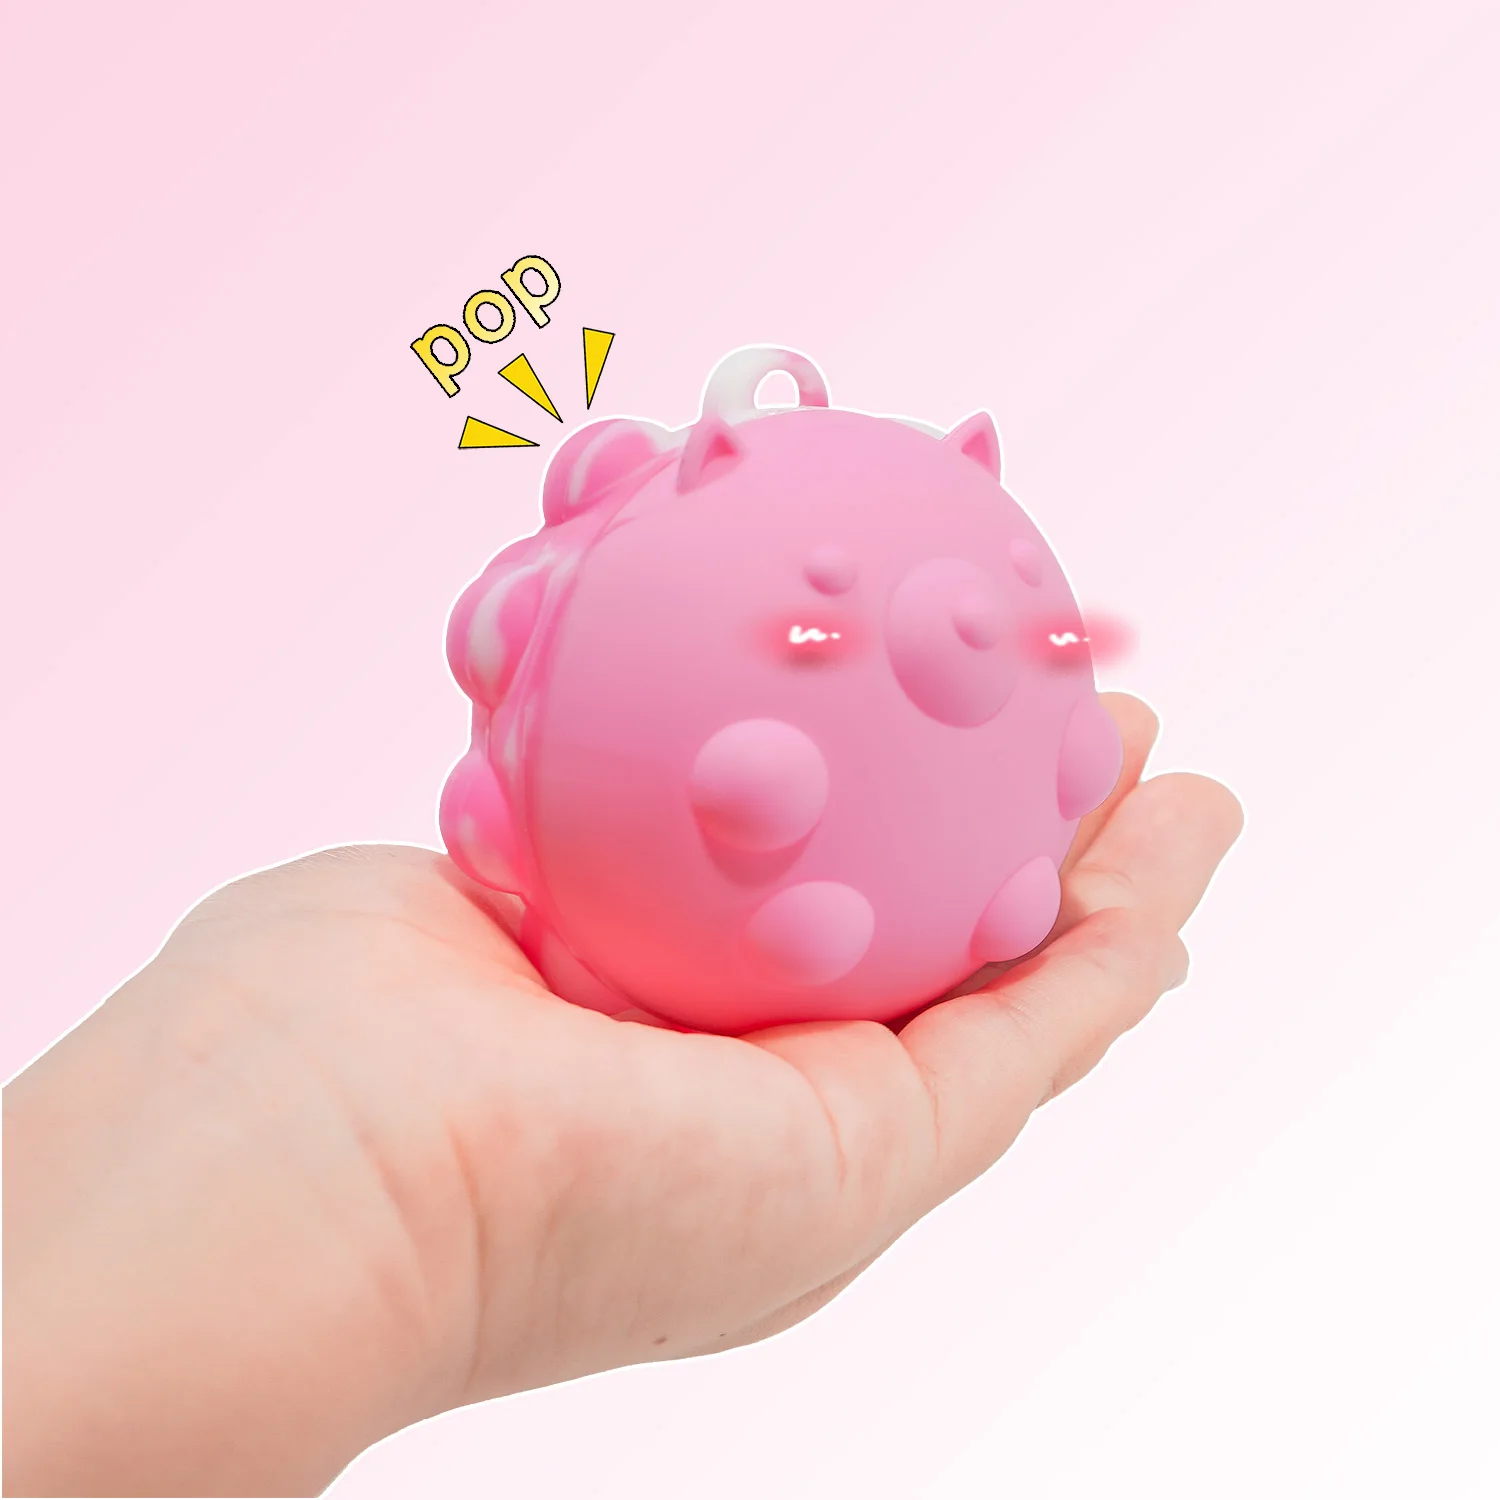 New Color Rainbow 3D Hedgehog Stress Balls Fidget Toy Silicone Popping Push it Bubble Fidget Ball Mesh Squish Stress Relief Ball